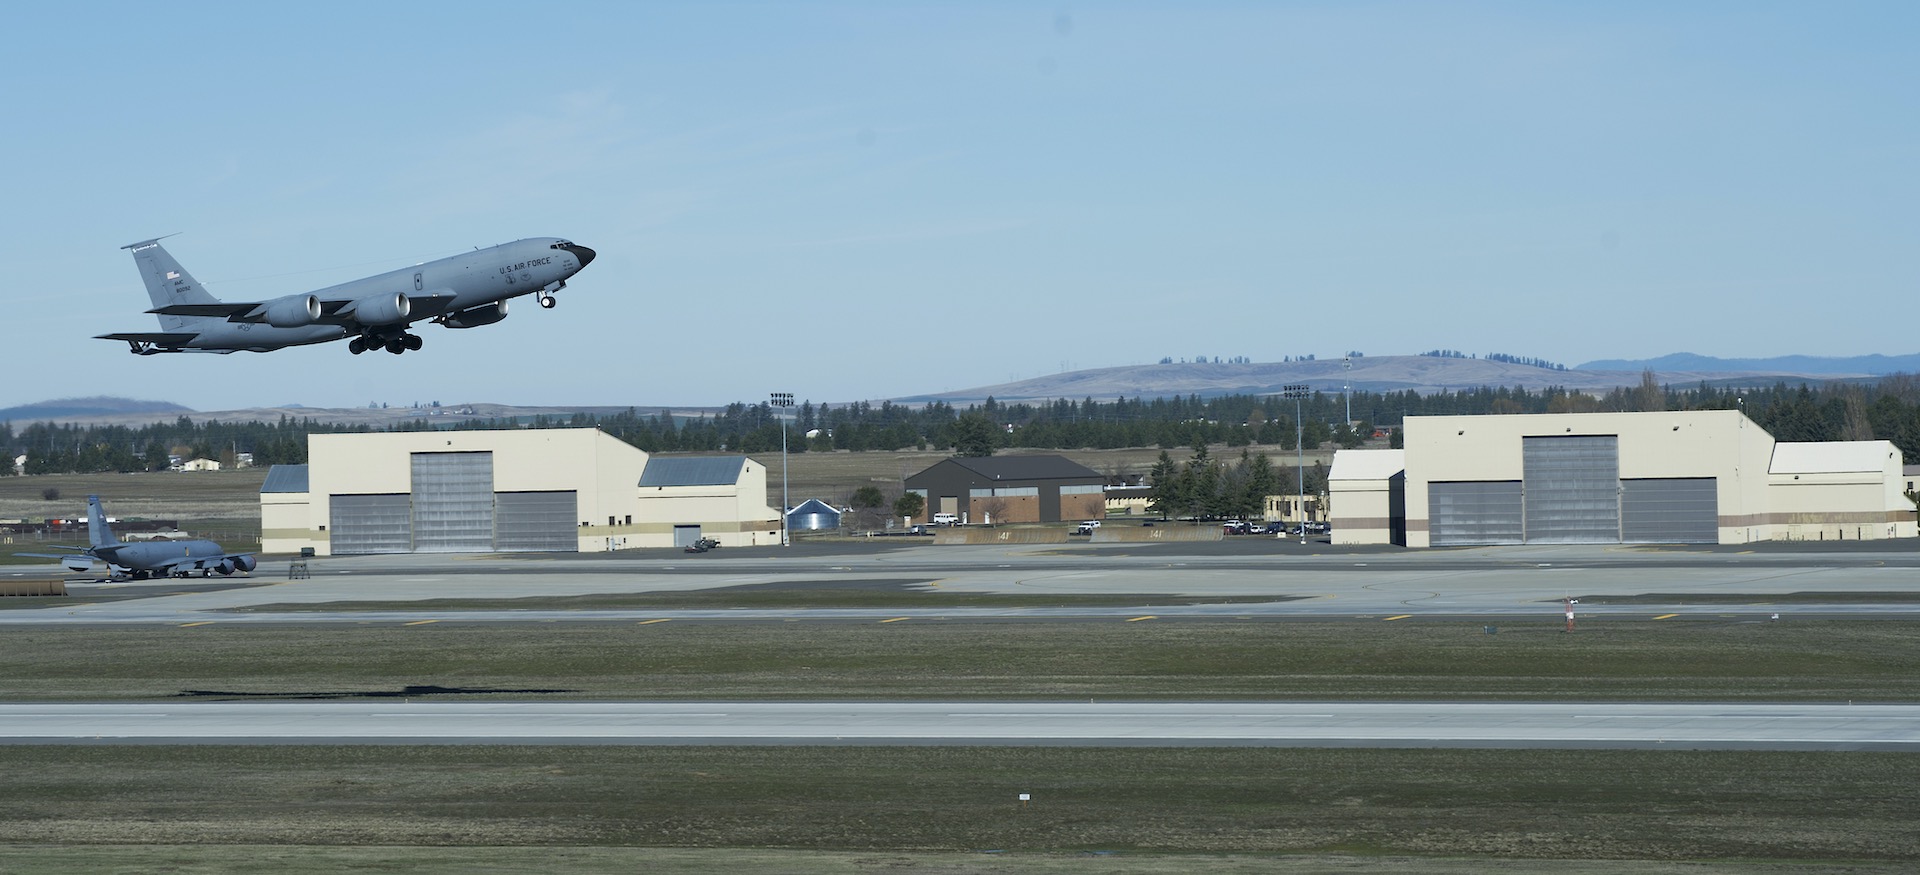 Fairchild AFB refueling tanker during takeoff with hangers in background